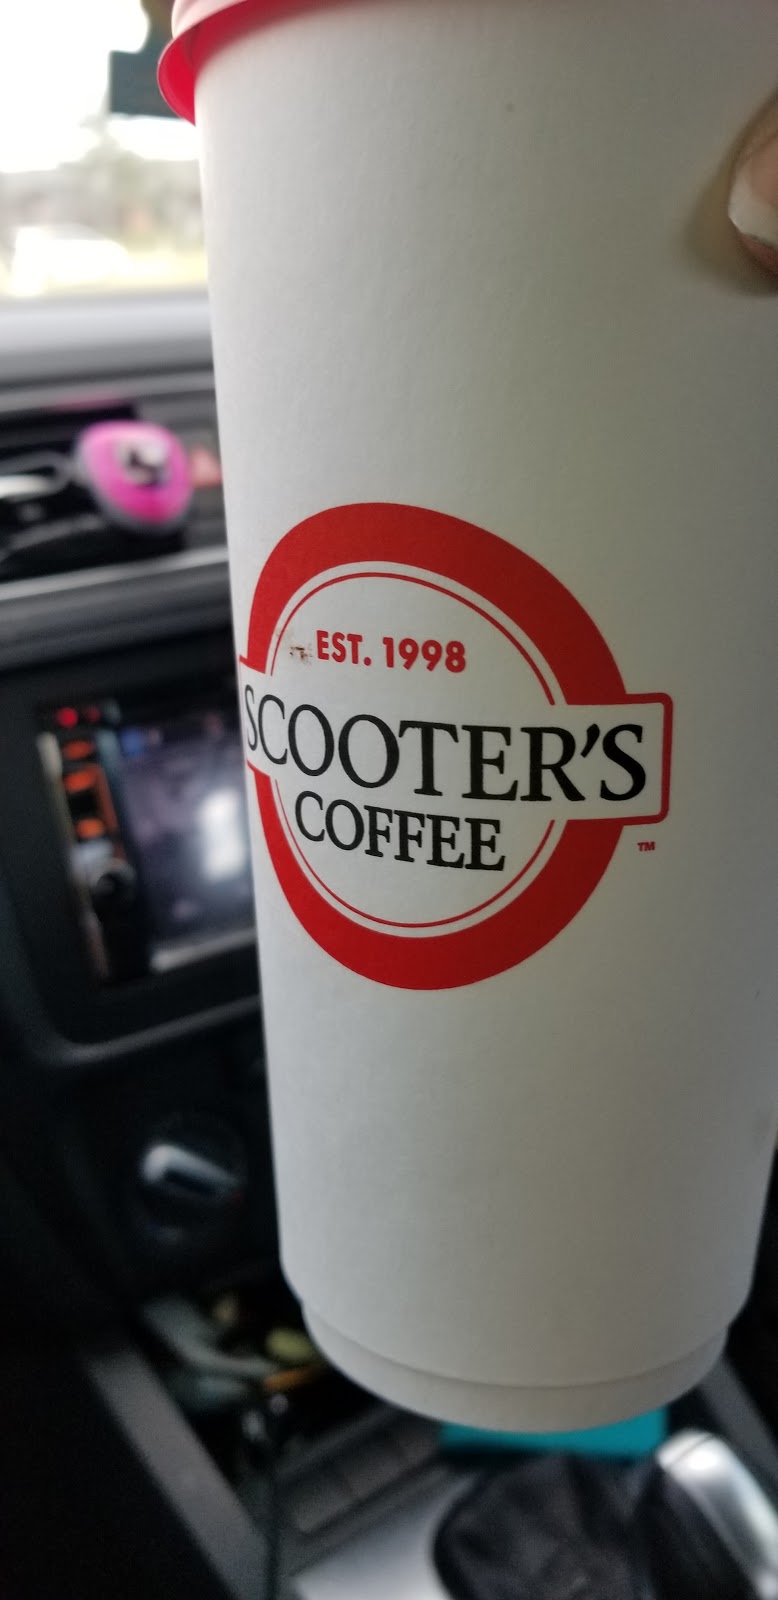 Scooters Coffee | 844 Fallbrook Blvd, Lincoln, NE 68521 | Phone: (402) 438-7160